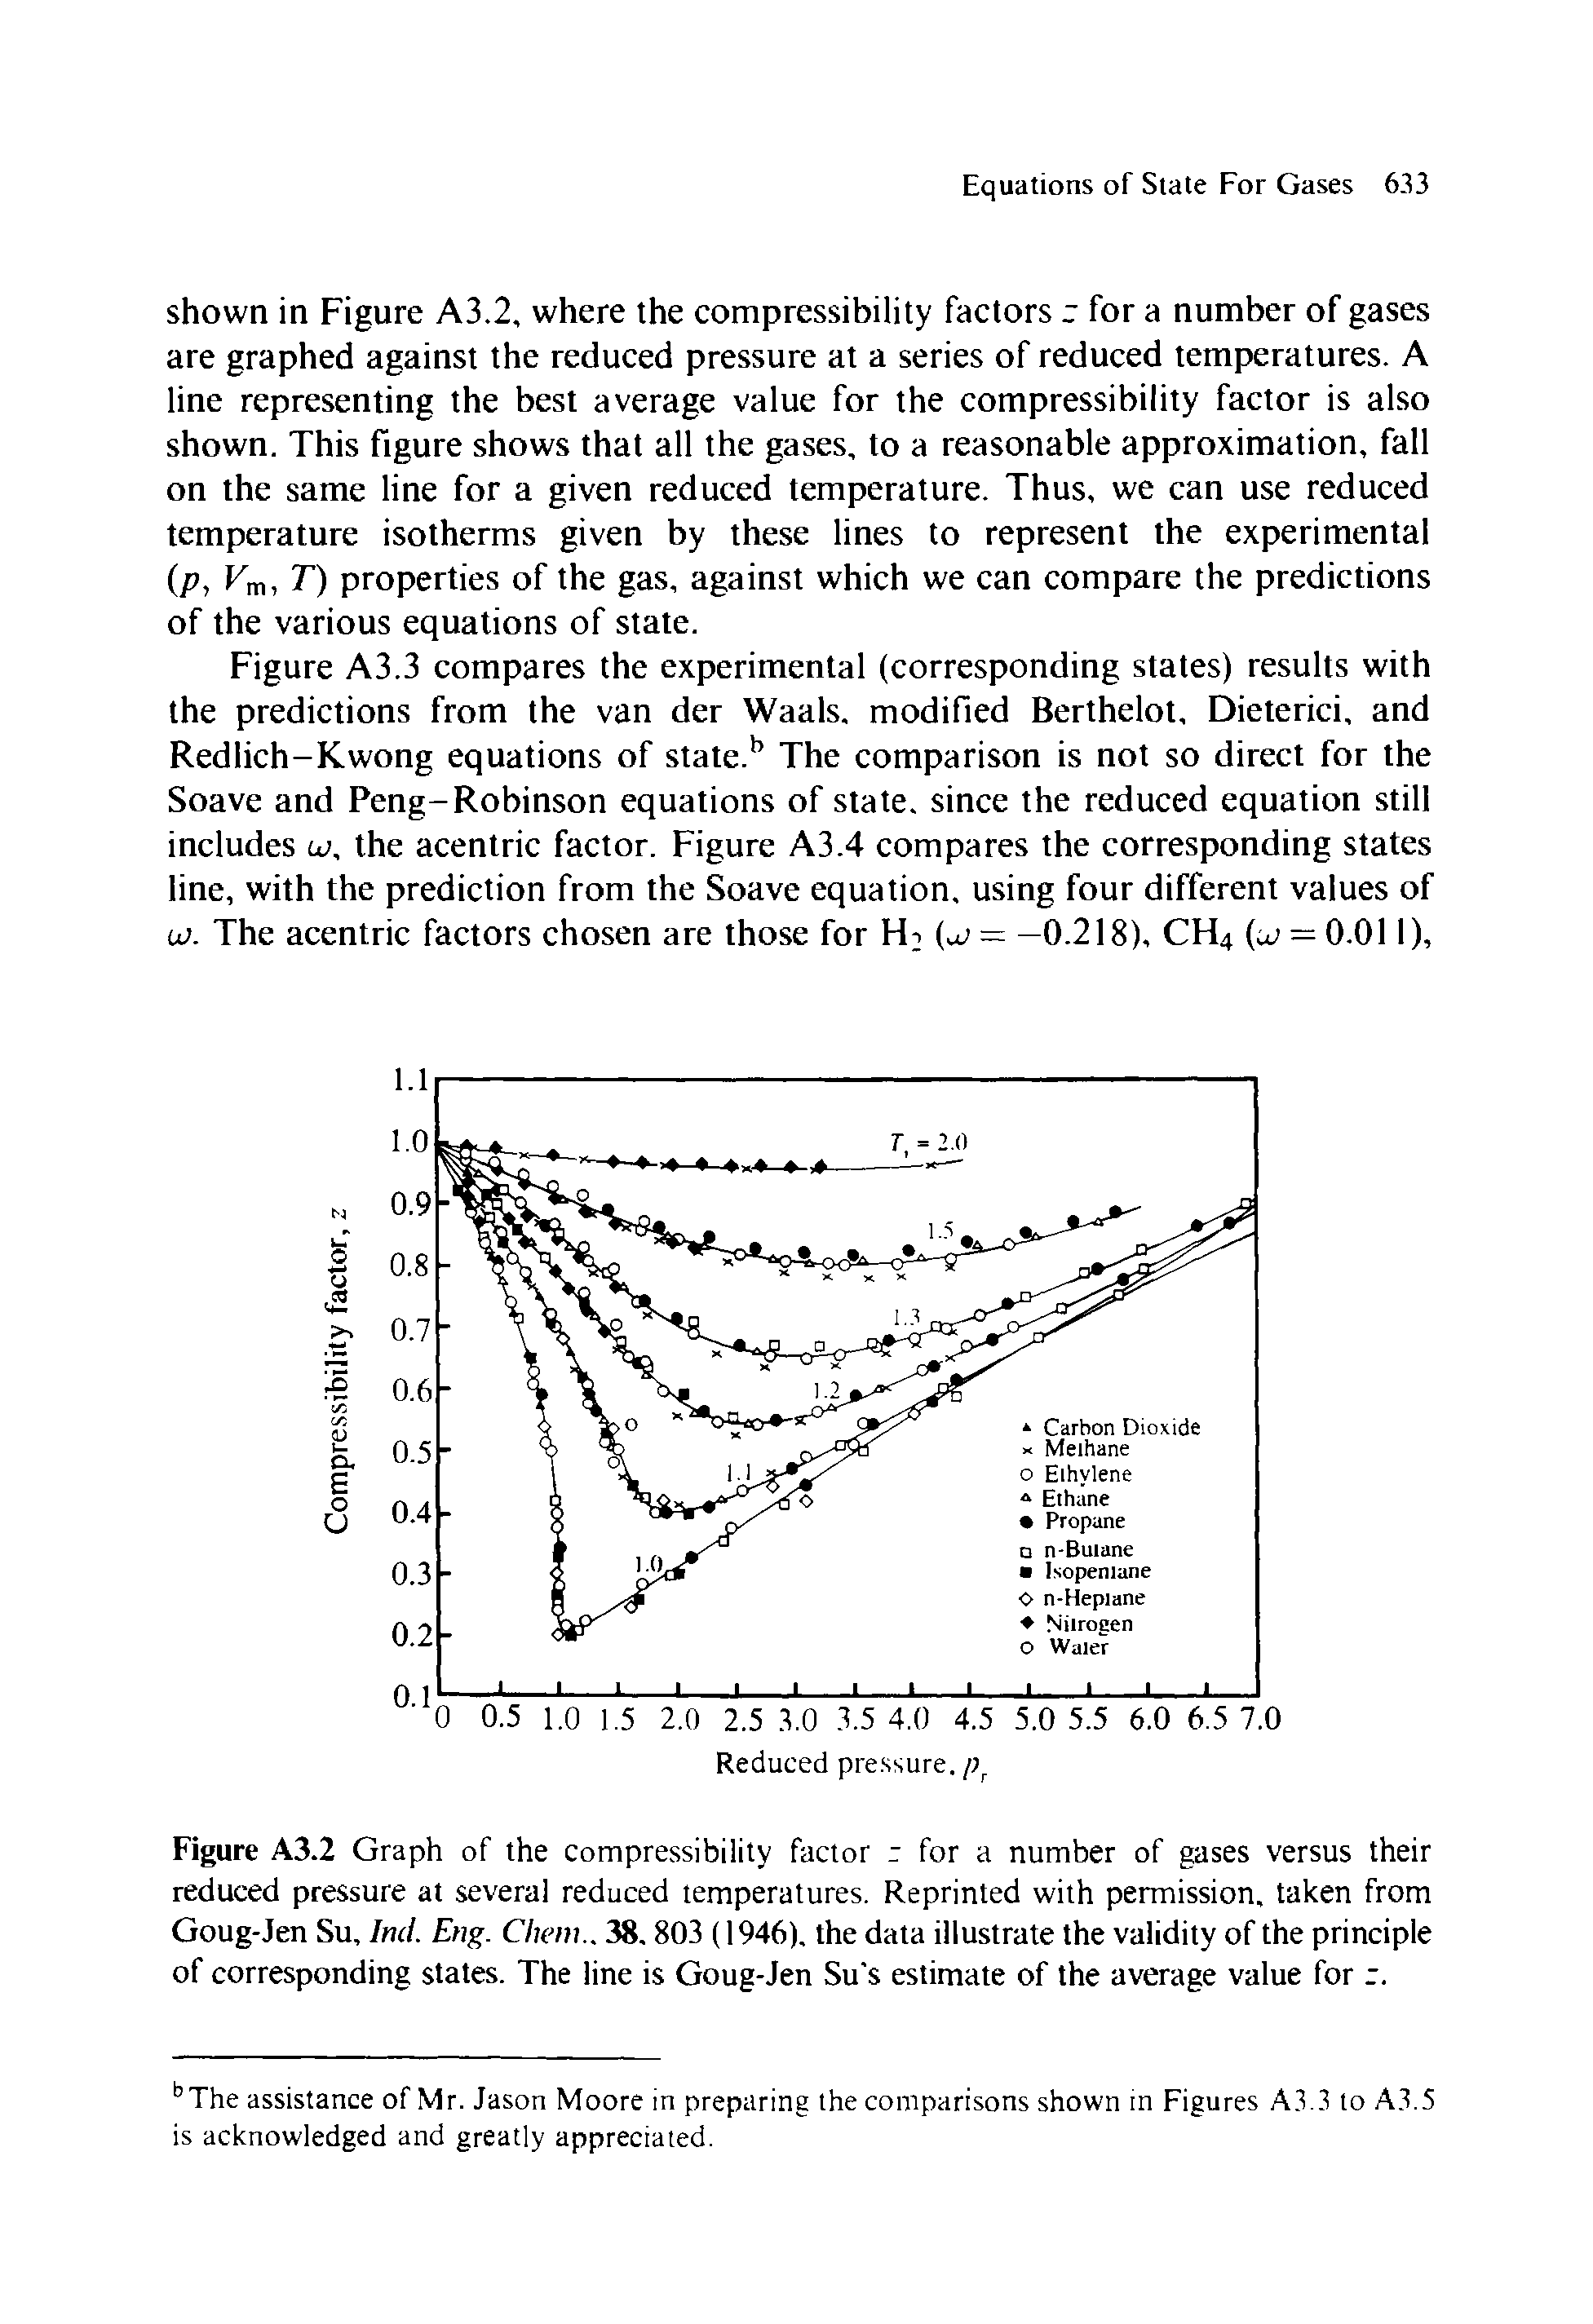 Figure A3.2 Graph of the compressibility factor r for a number of gases versus their reduced pressure at several reduced temperatures. Reprinted with permission, taken from Goug-Jen Su, Ind. Eng. Chem.. 38,803 (1946), the data illustrate the validity of the principle of corresponding states. The line is Goug-Jen Su s estimate of the average value for r.